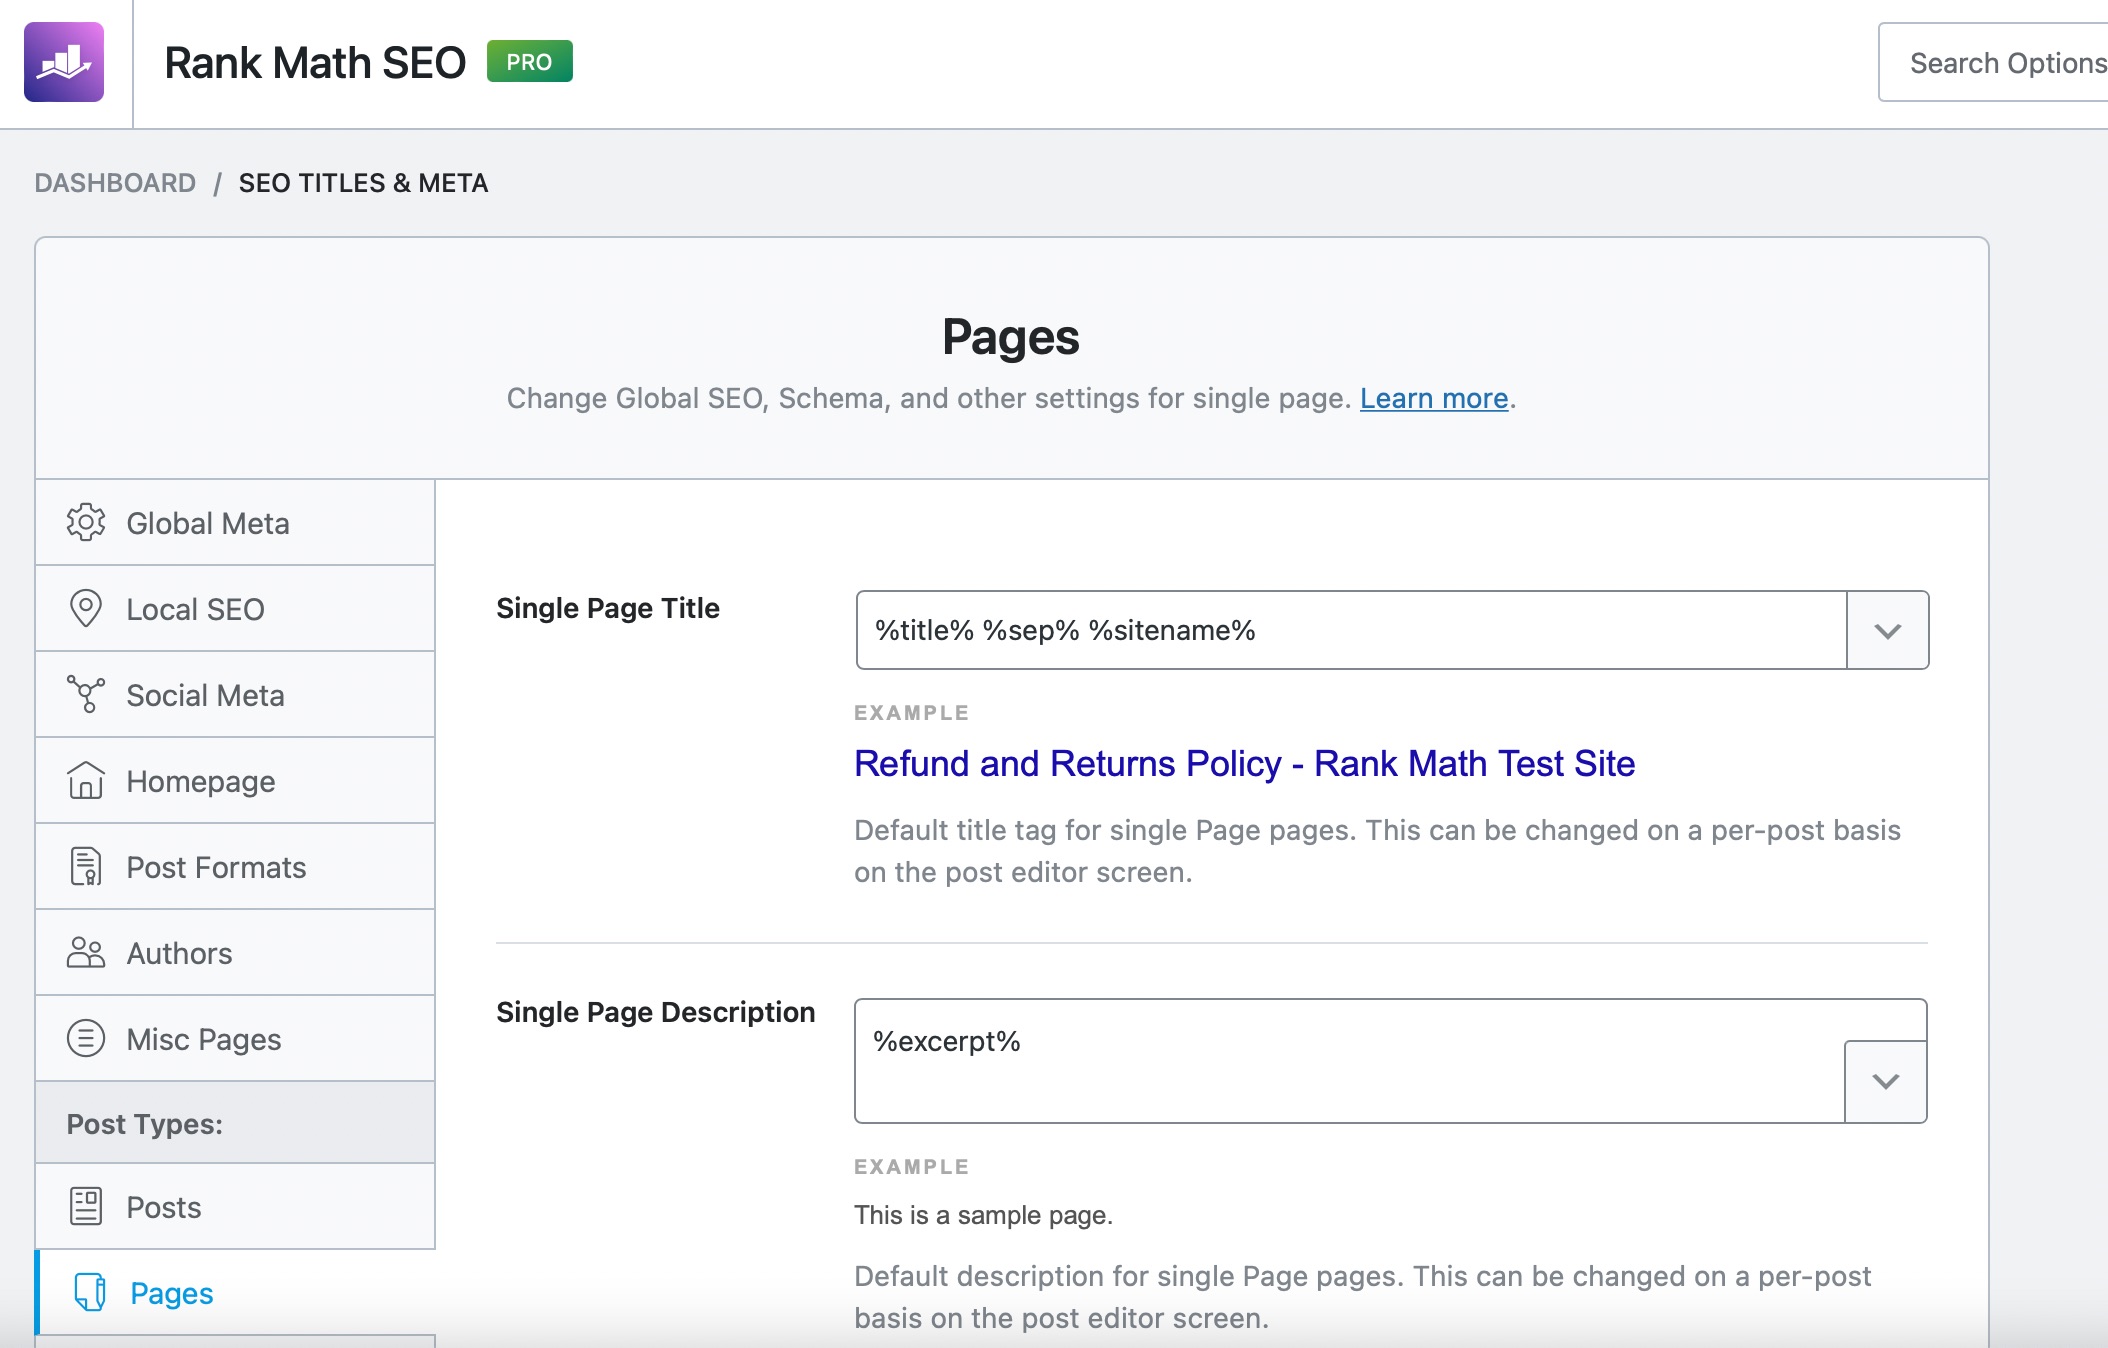 SEO settings for Pages